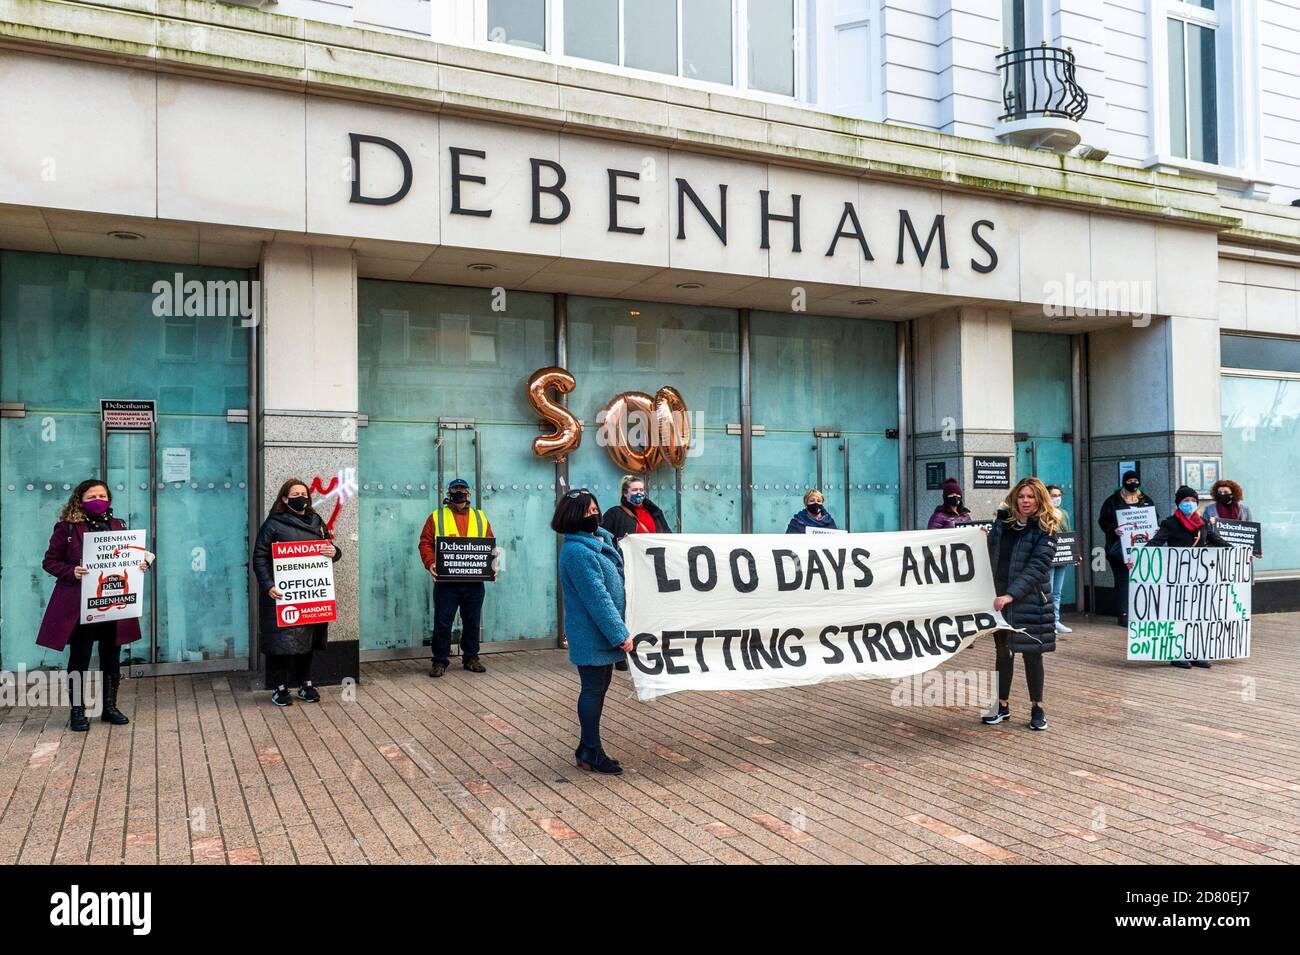 Cork, Ireland. 26th Oct, 2020. Ex-Debenhams workers held a small rally outisde the Patrick Street, Cork store this afternoon to mark their 200th day on the picket line. The liquidators, KPMG, are refusing to engage with the picketers who claim they're owed a bigger redundancy package than is being offered. The ex-workers say they're resolute and are there for the long haul. Credit: AG News/Alamy Live News Stock Photo